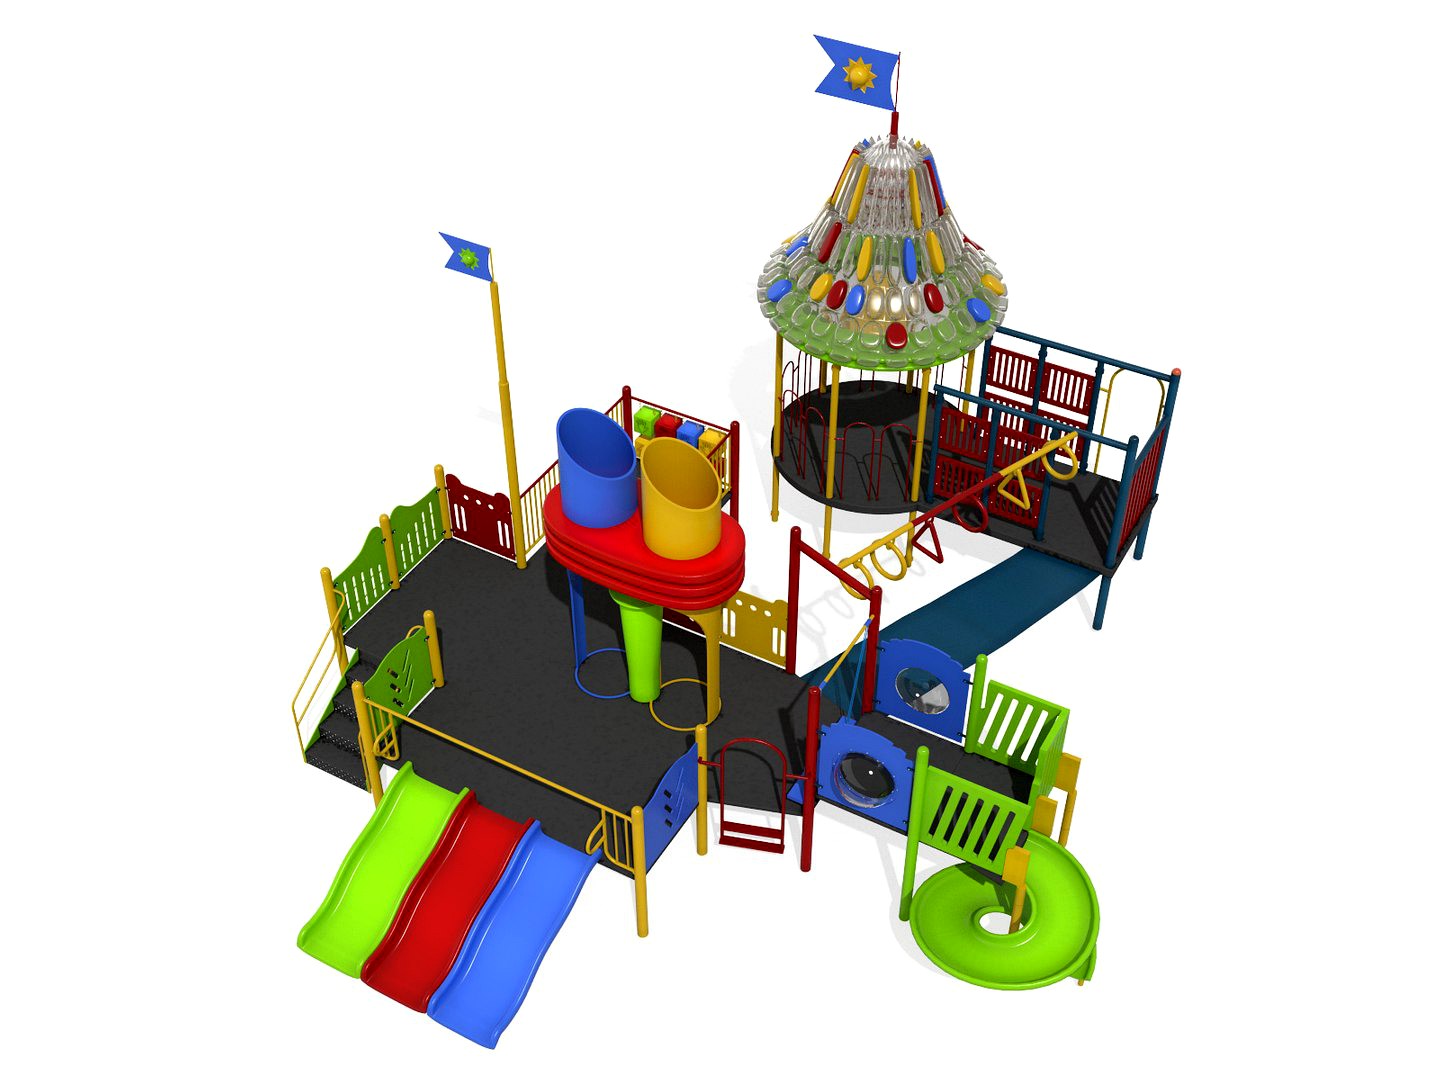 Play Area for Children